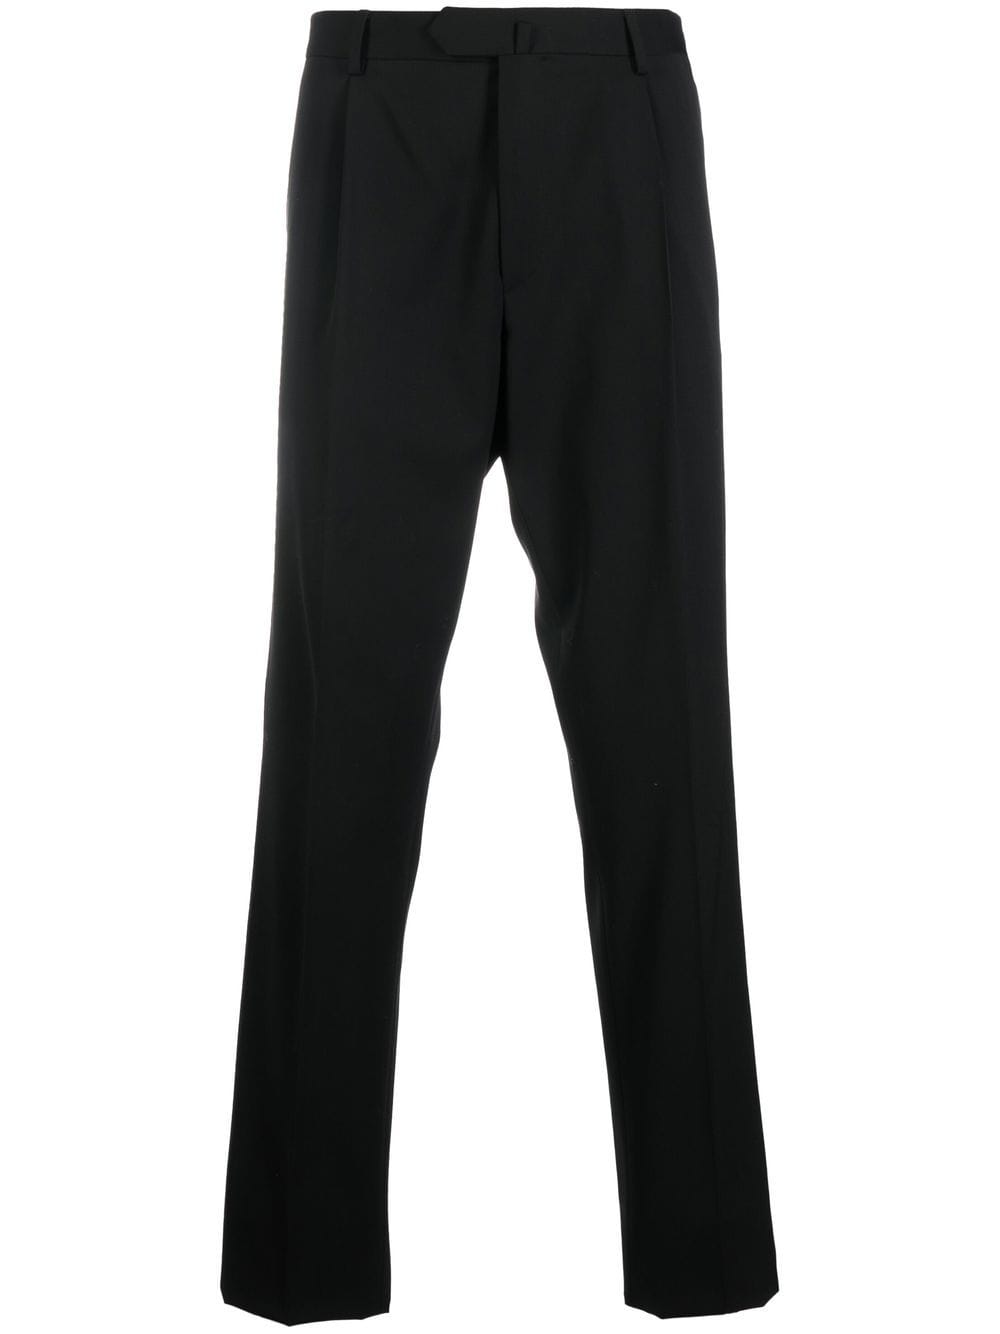 pleat-detail four-pocket tailored trousers